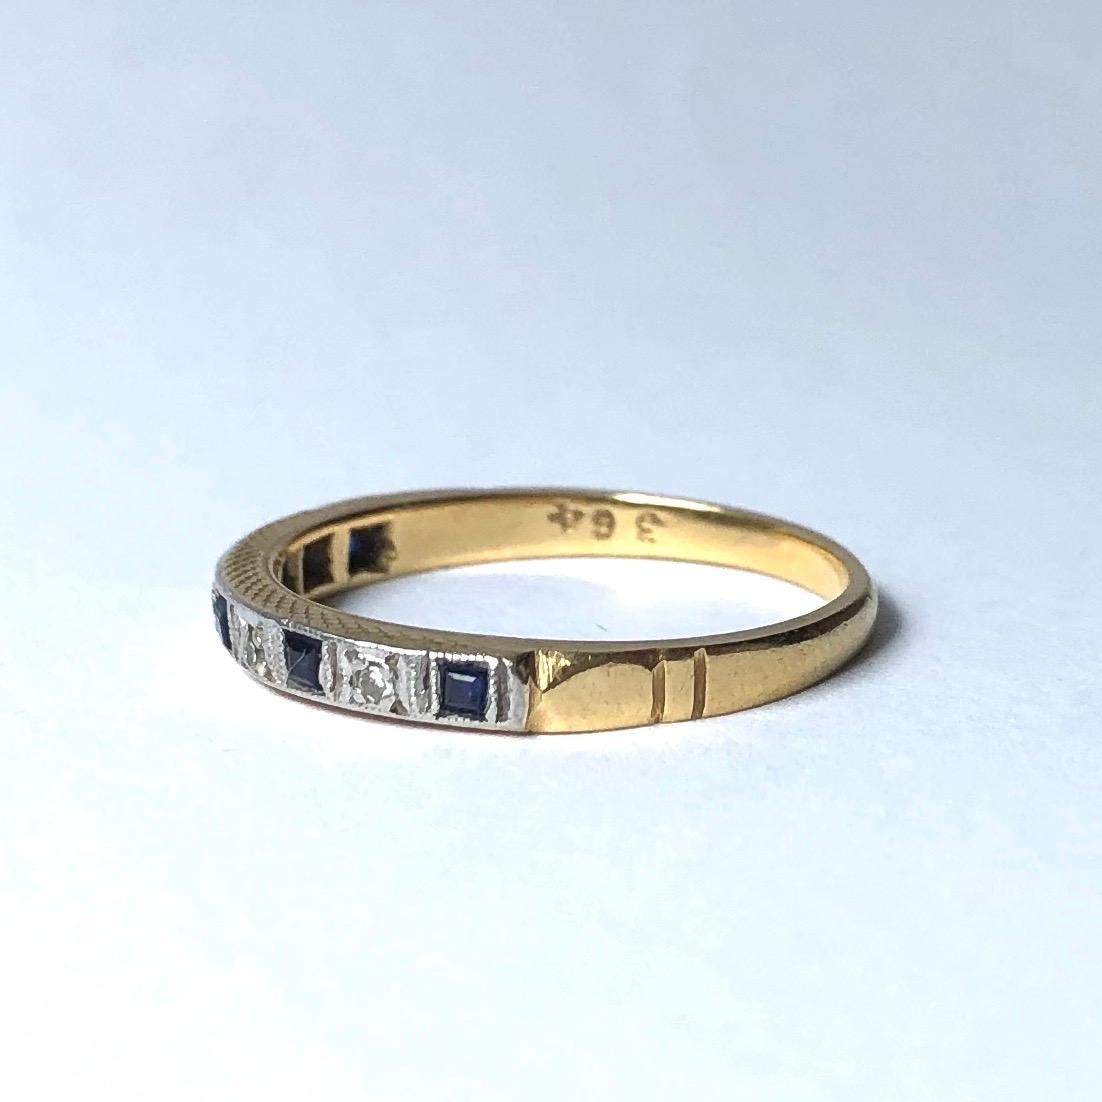 This half eternity band holds five sapphires each measuring approximately 5pts and between them sit four diamonds measuring 2pts each. 

Ring Size: P or 7 3/4
Band Width: 2mm

Weight: 2.56g